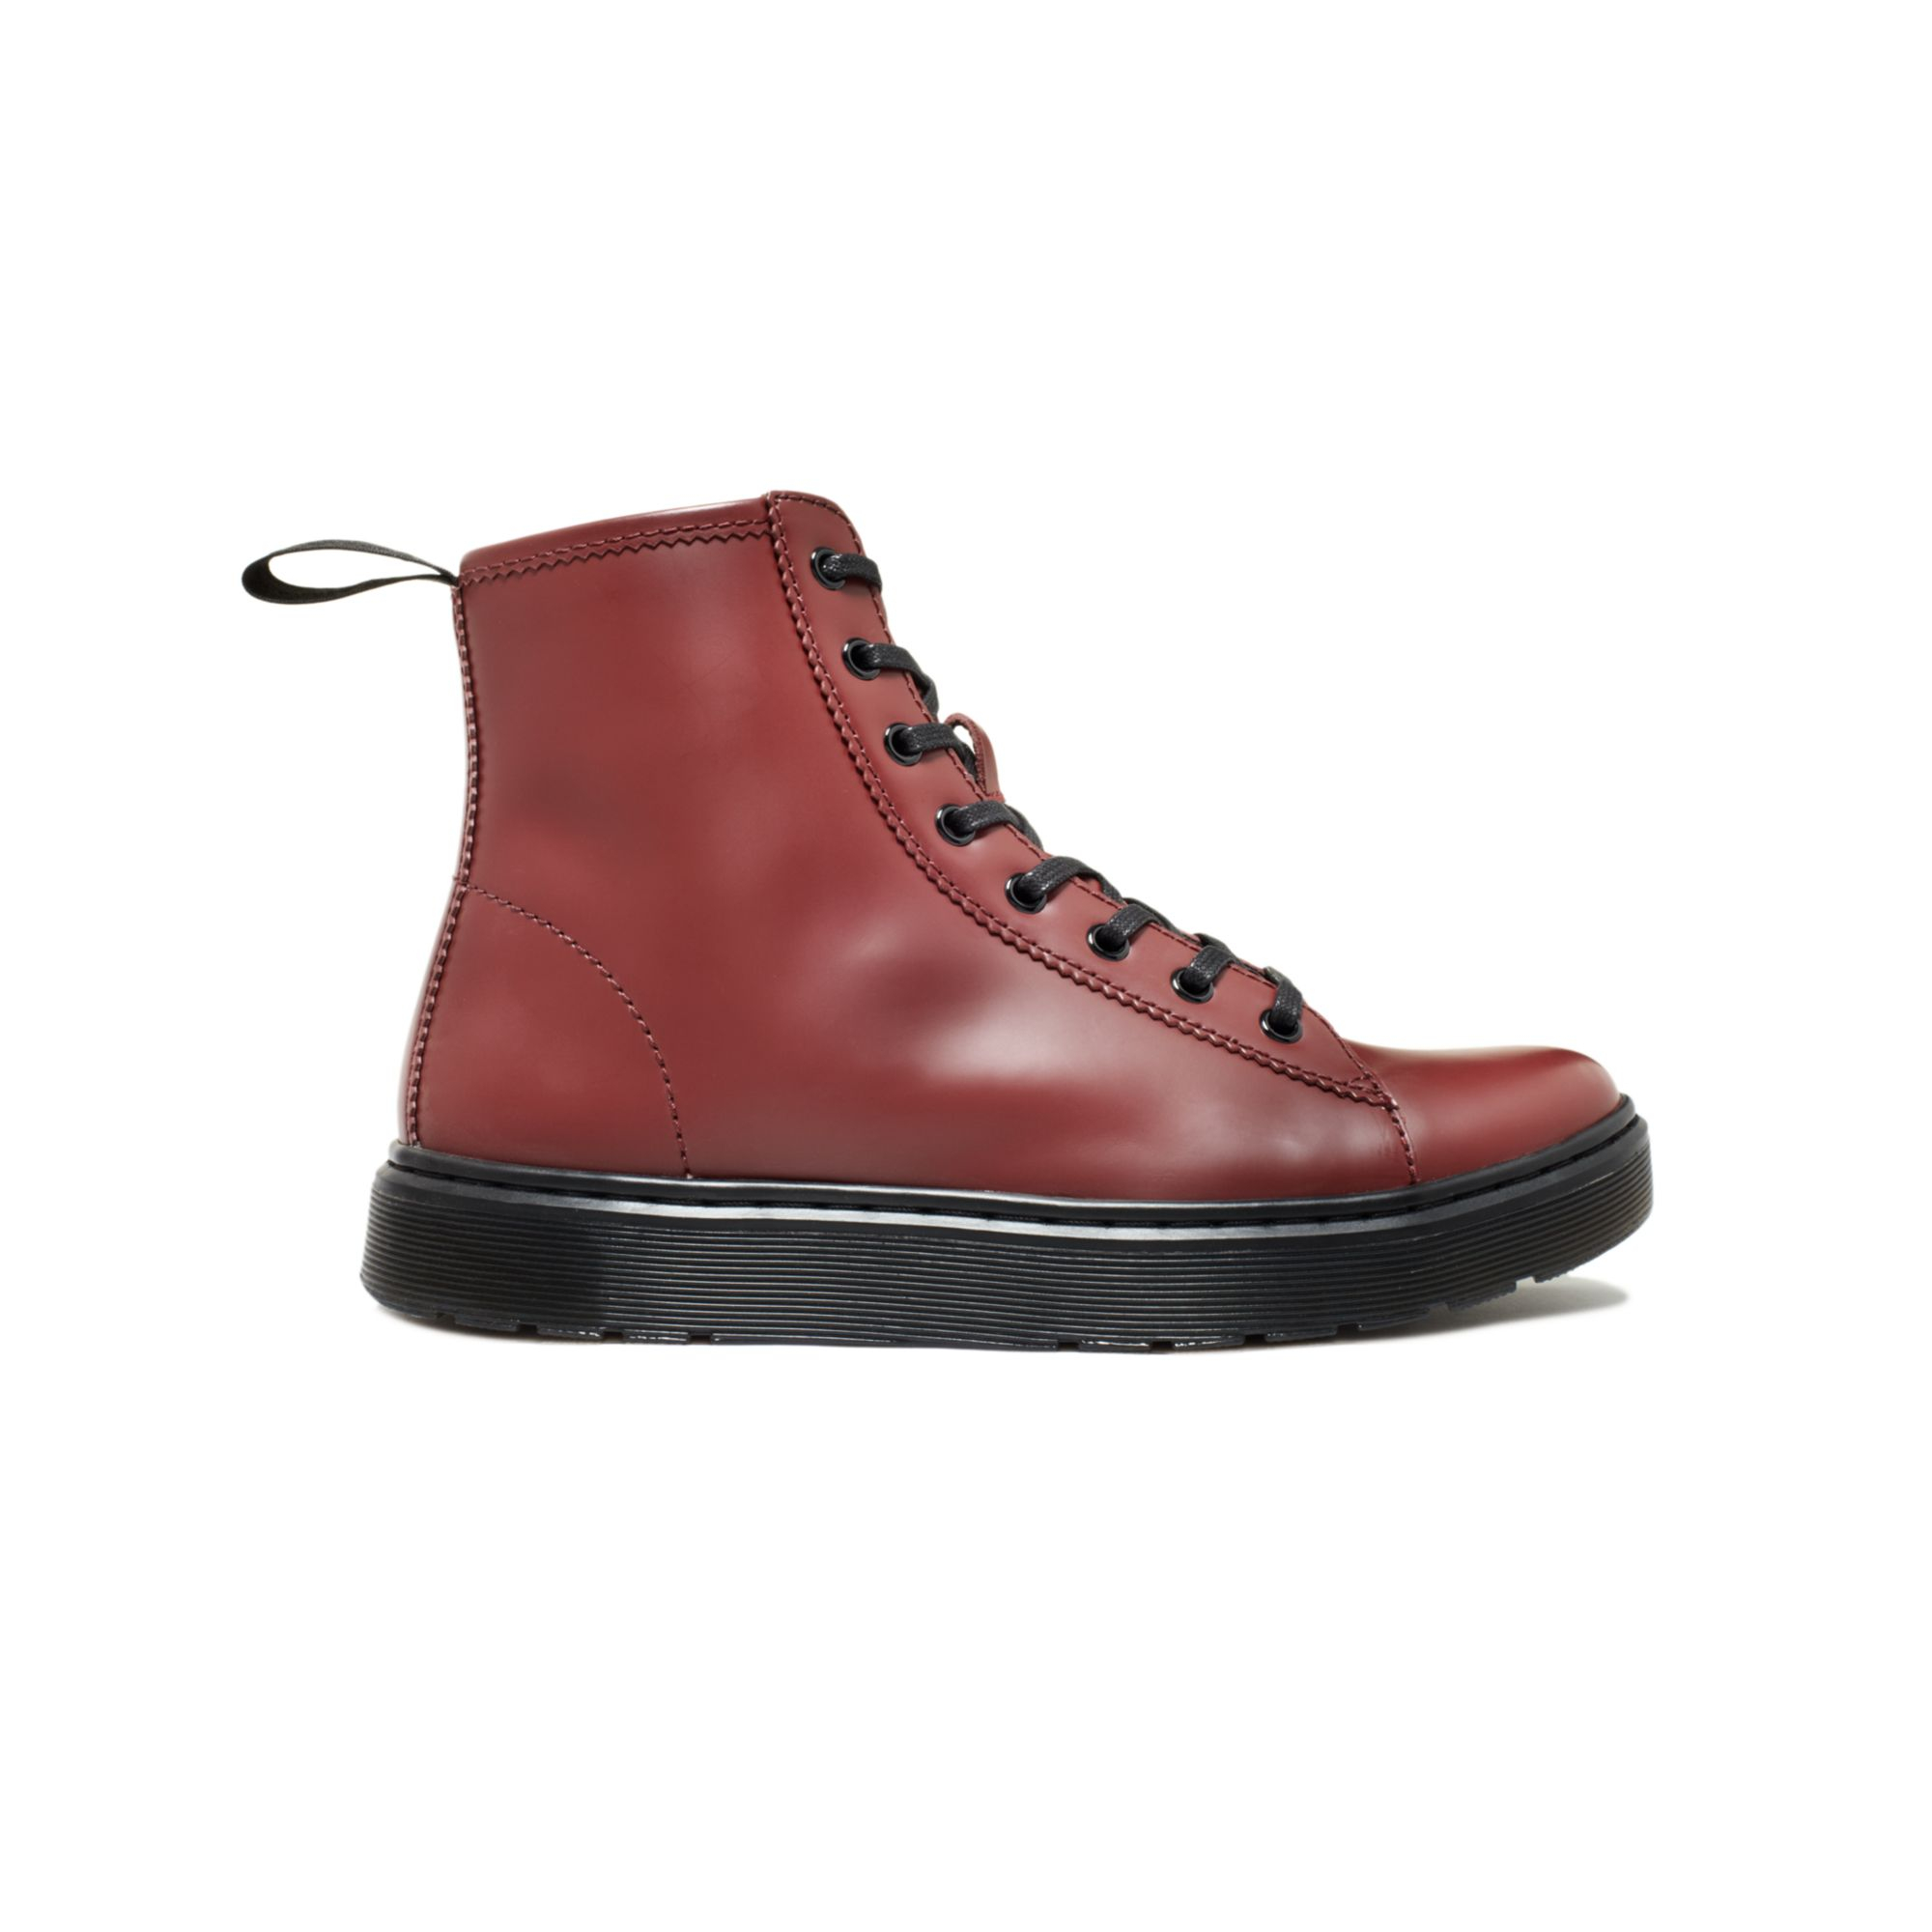 Dr. Martens Mayer Lace To Toe Boots in Cherry Red (Red) for Men - Lyst